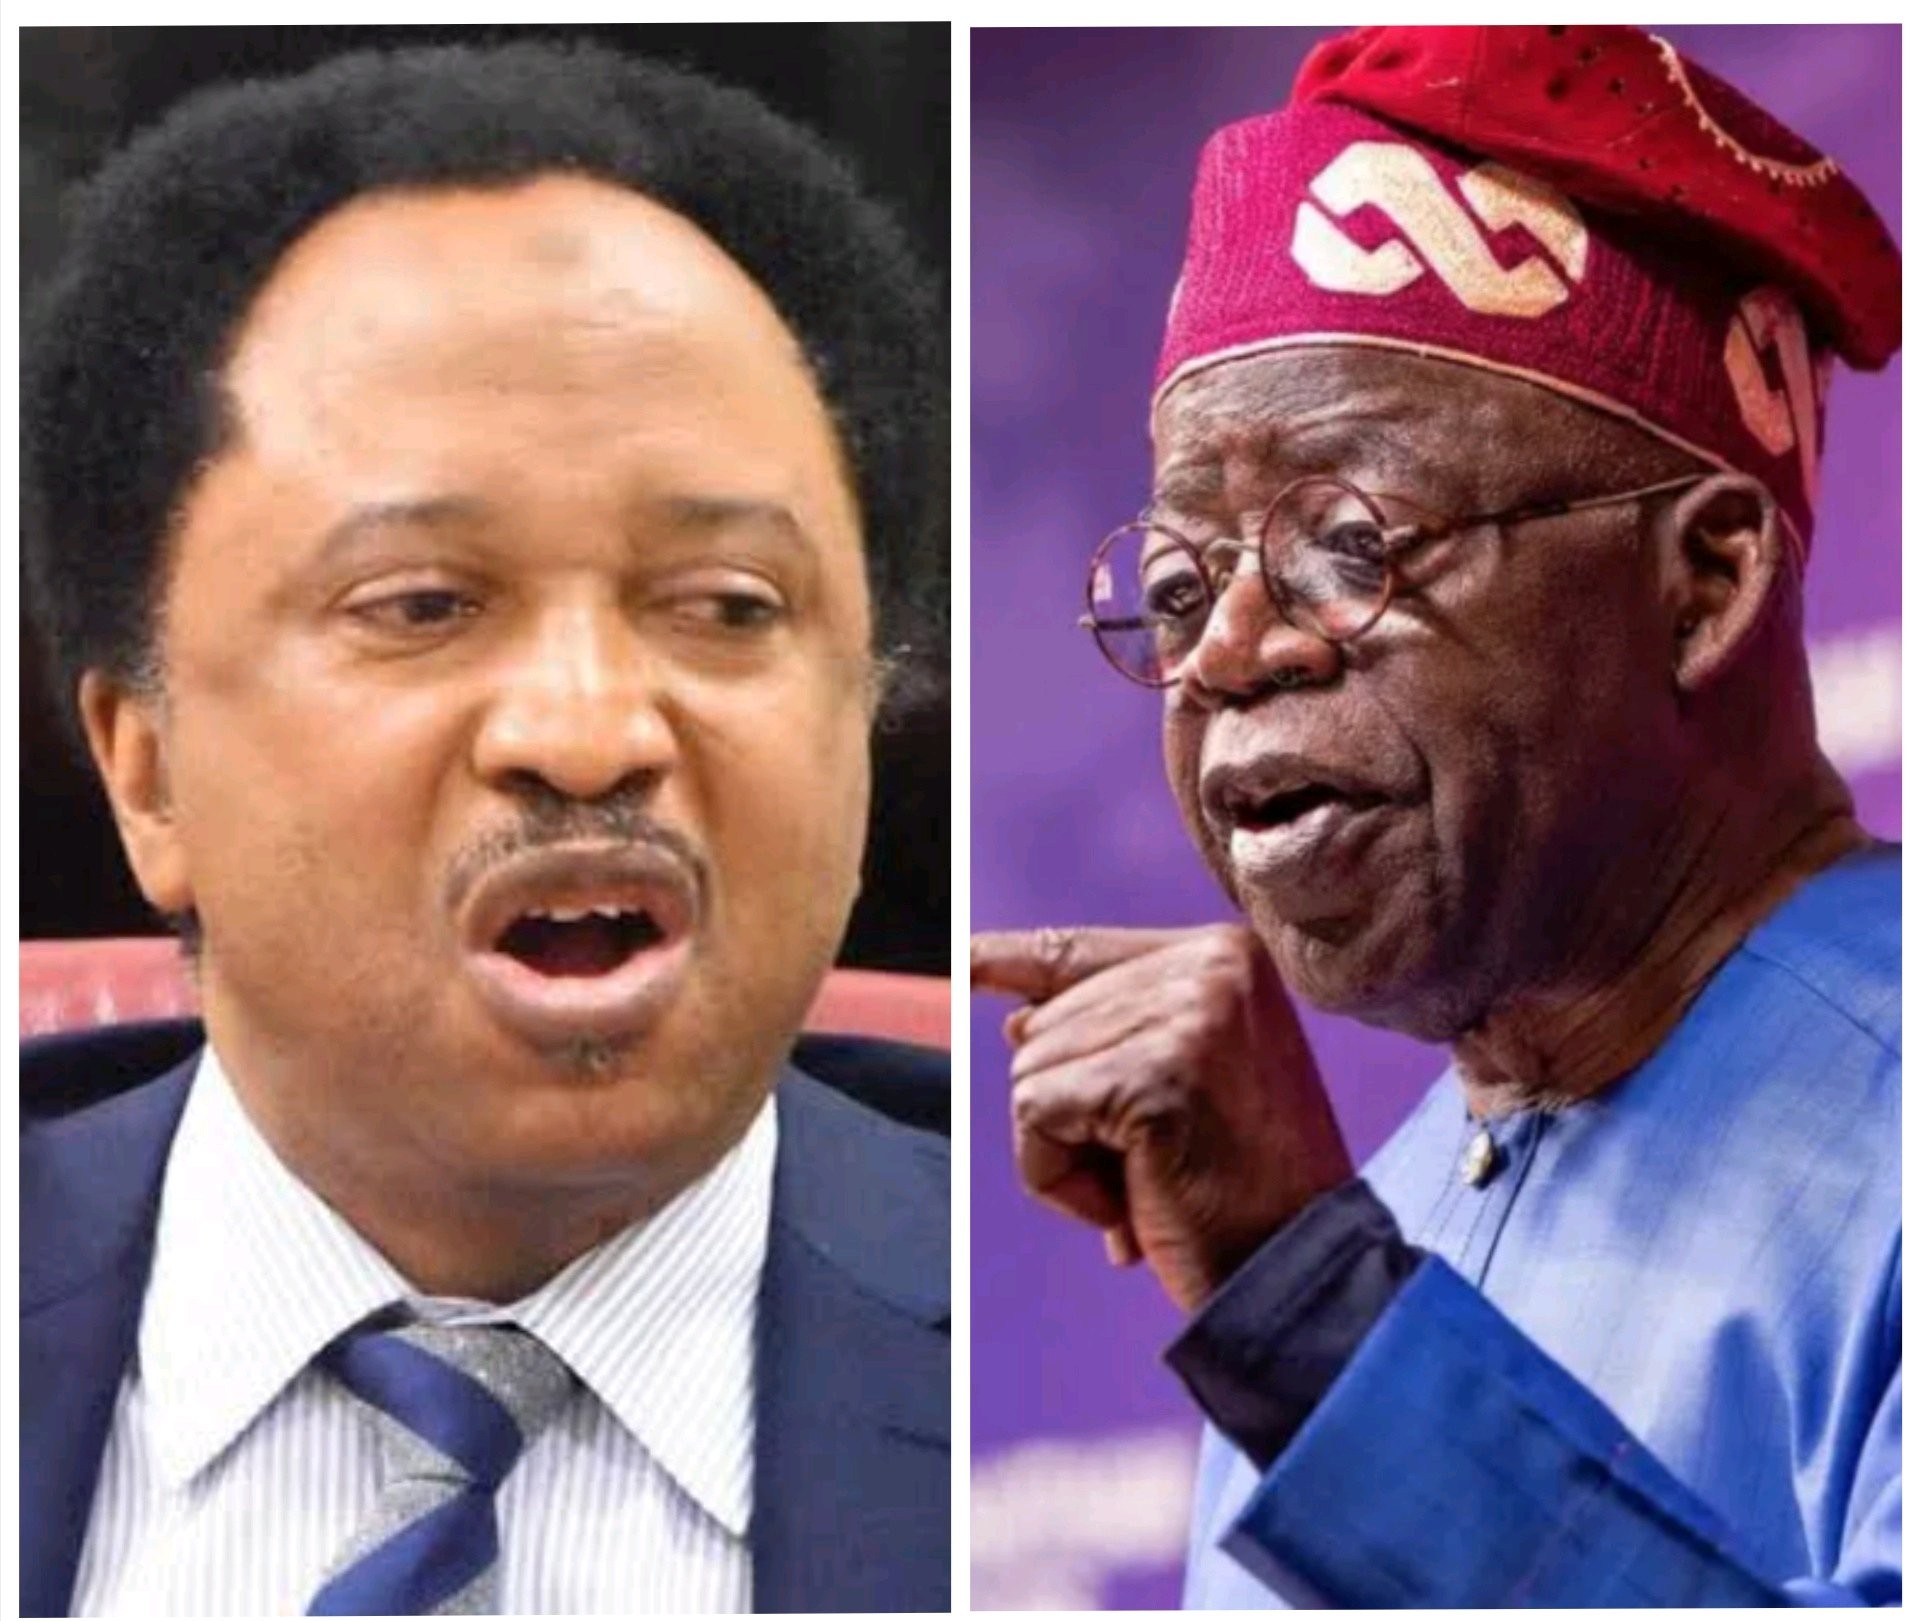 Sani Response To Questions On Where Tinubu Is: "Why Are You Asking About Whereabouts Of Mr President?"